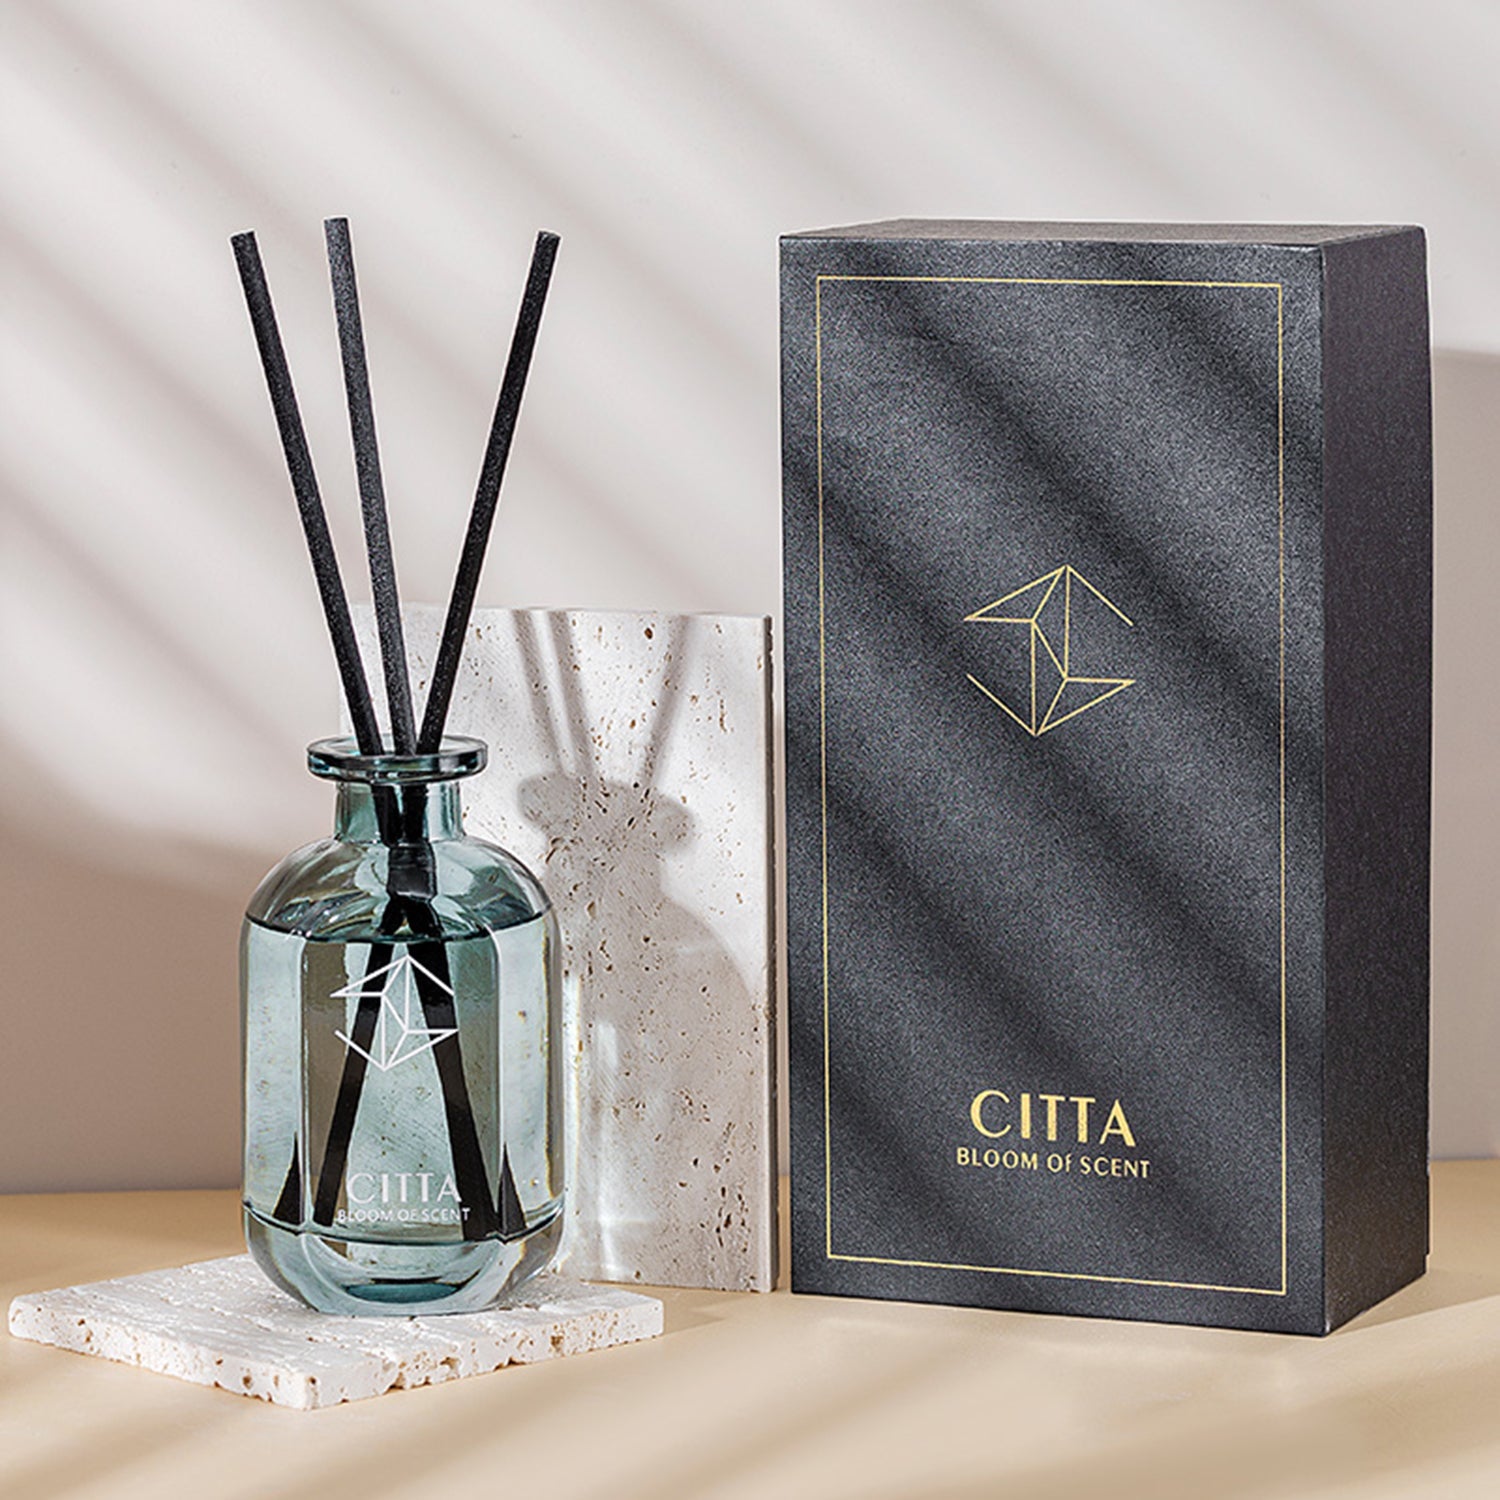 CITTA Wonderland Series Reed Diffuser Aromatherapy 180ML Premium Essential Oil with Reed Stick Reed Diffuser CITTA 